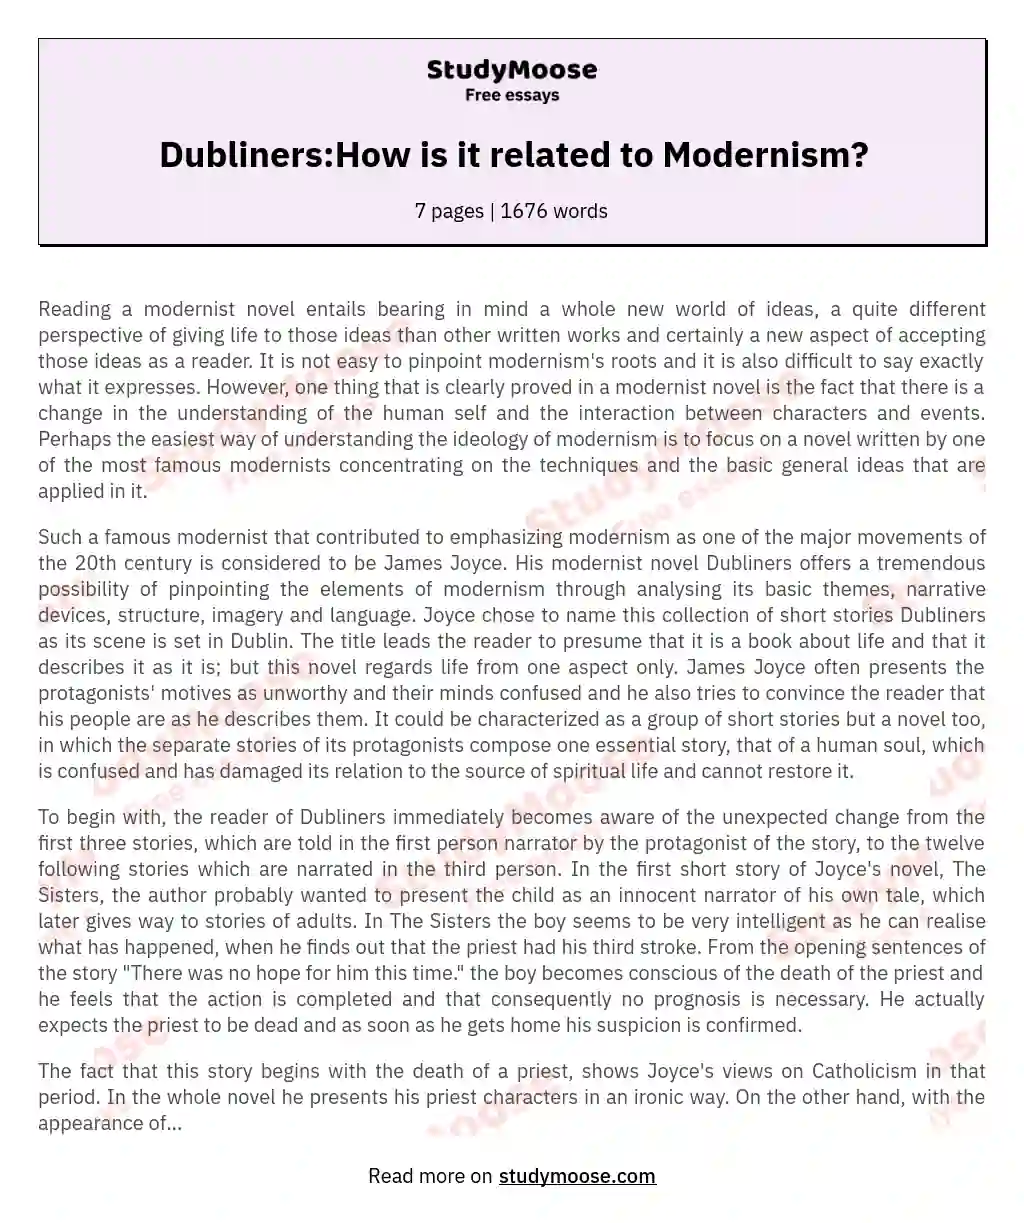 Dubliners:How is it related to Modernism? essay